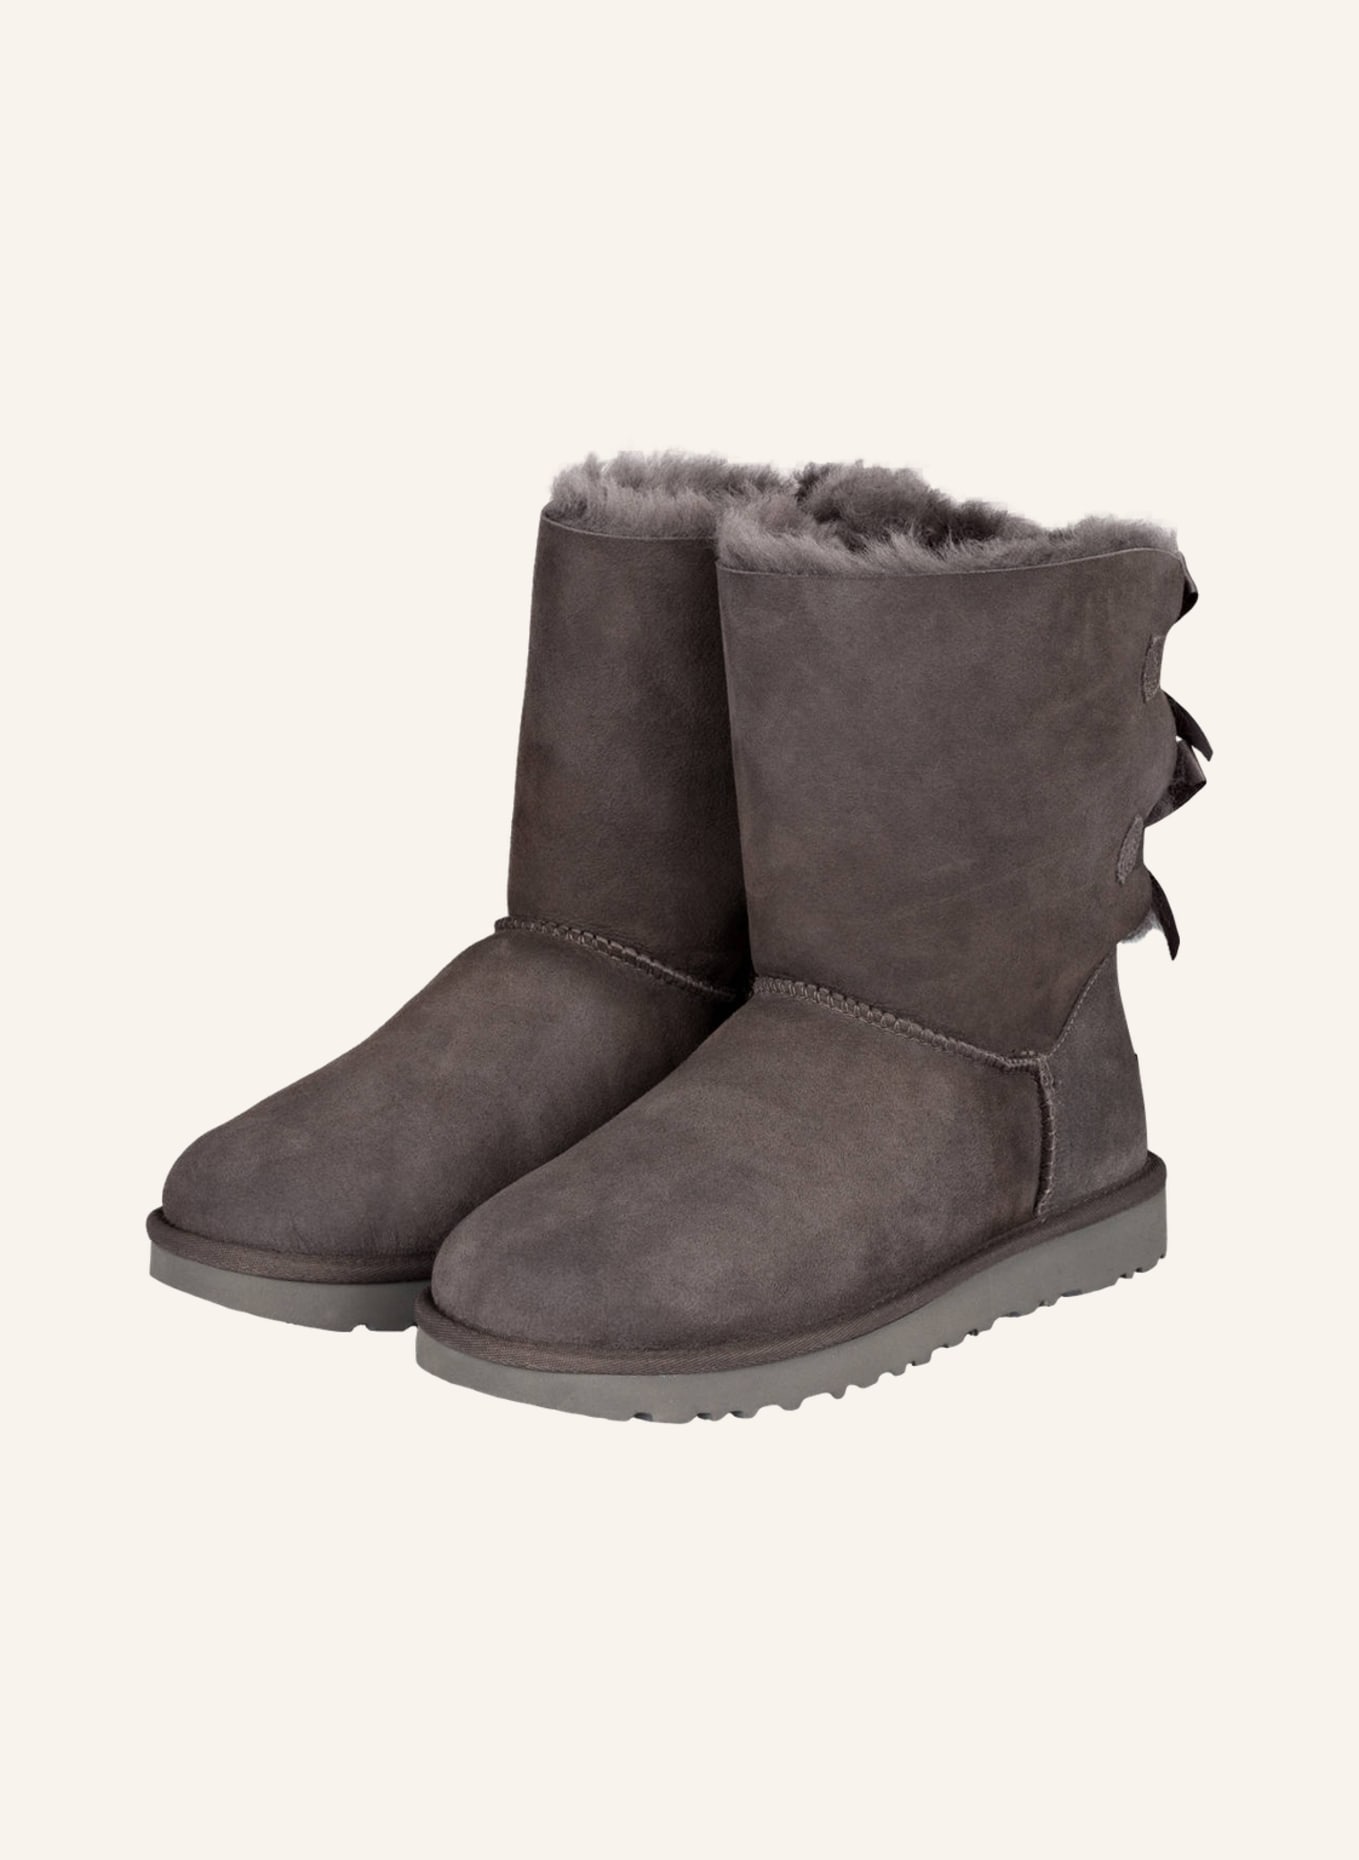 UGG Bailey Bow II Boot In Goat, 8 